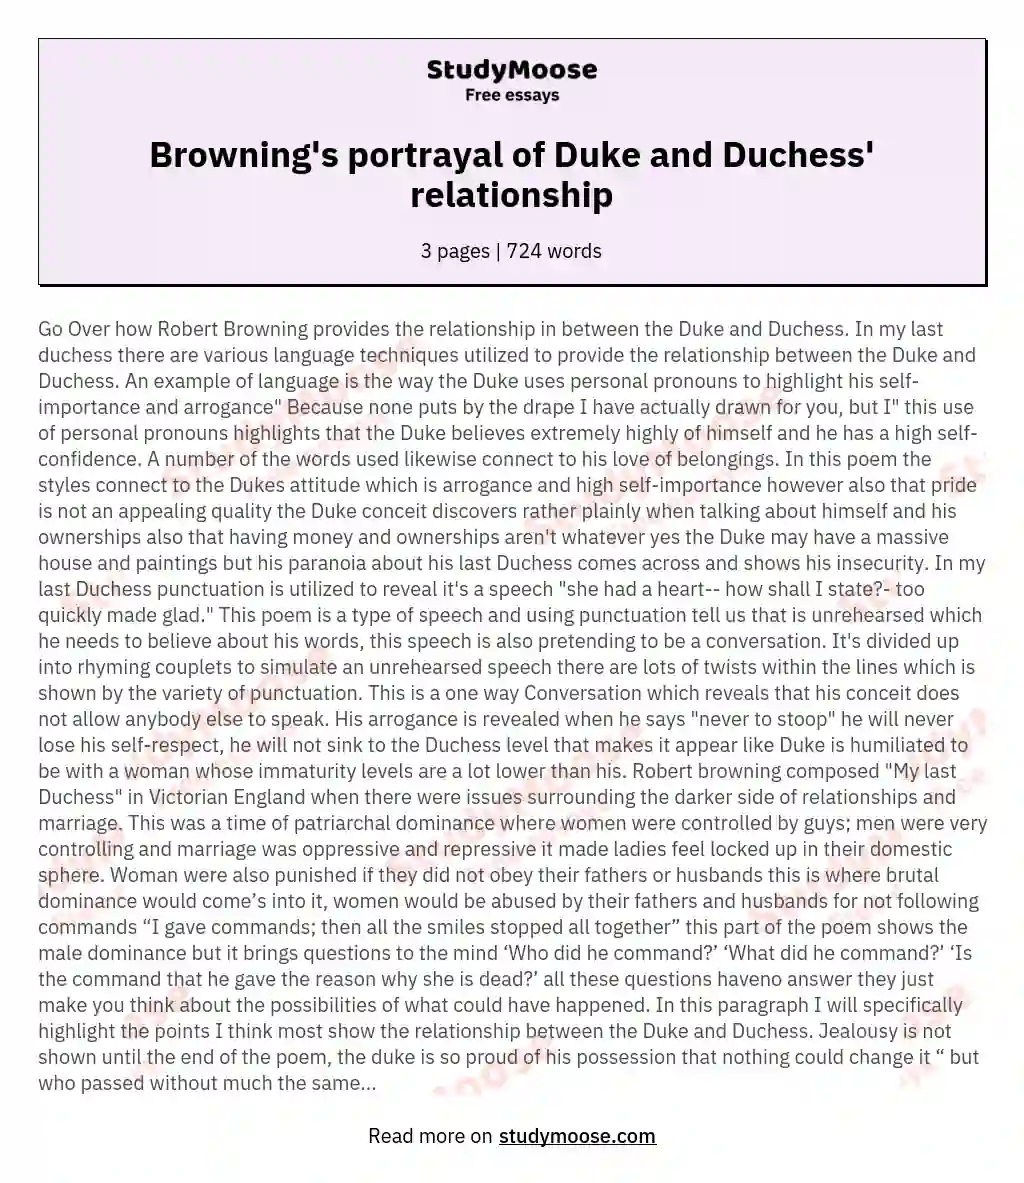 Browning's portrayal of Duke and Duchess' relationship essay